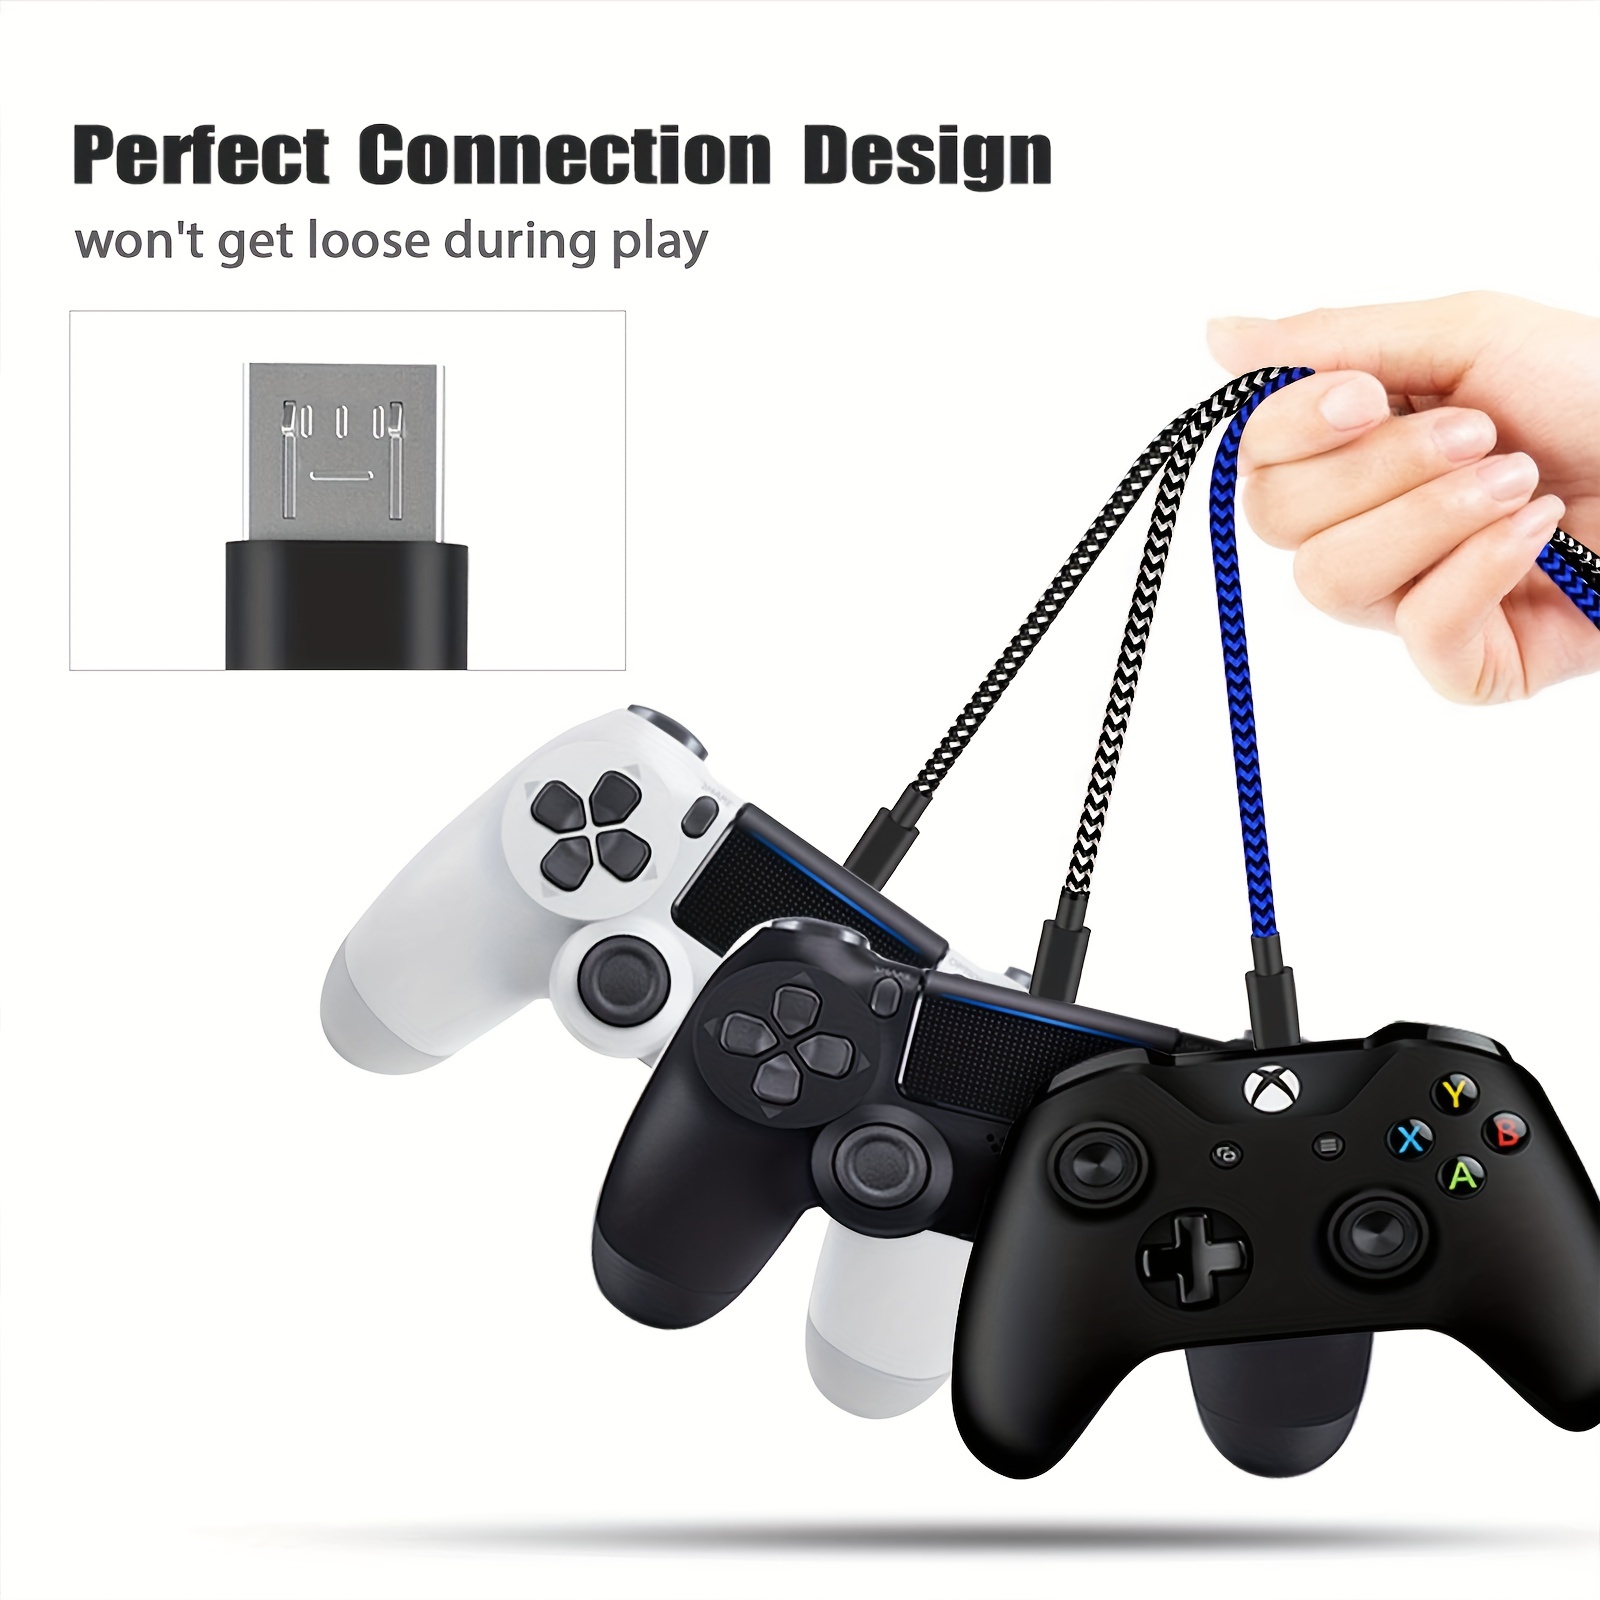 OFFICIAL GENUINE SONY PS4 Micro USB Charge & Play Cable Playstation 4  Controller